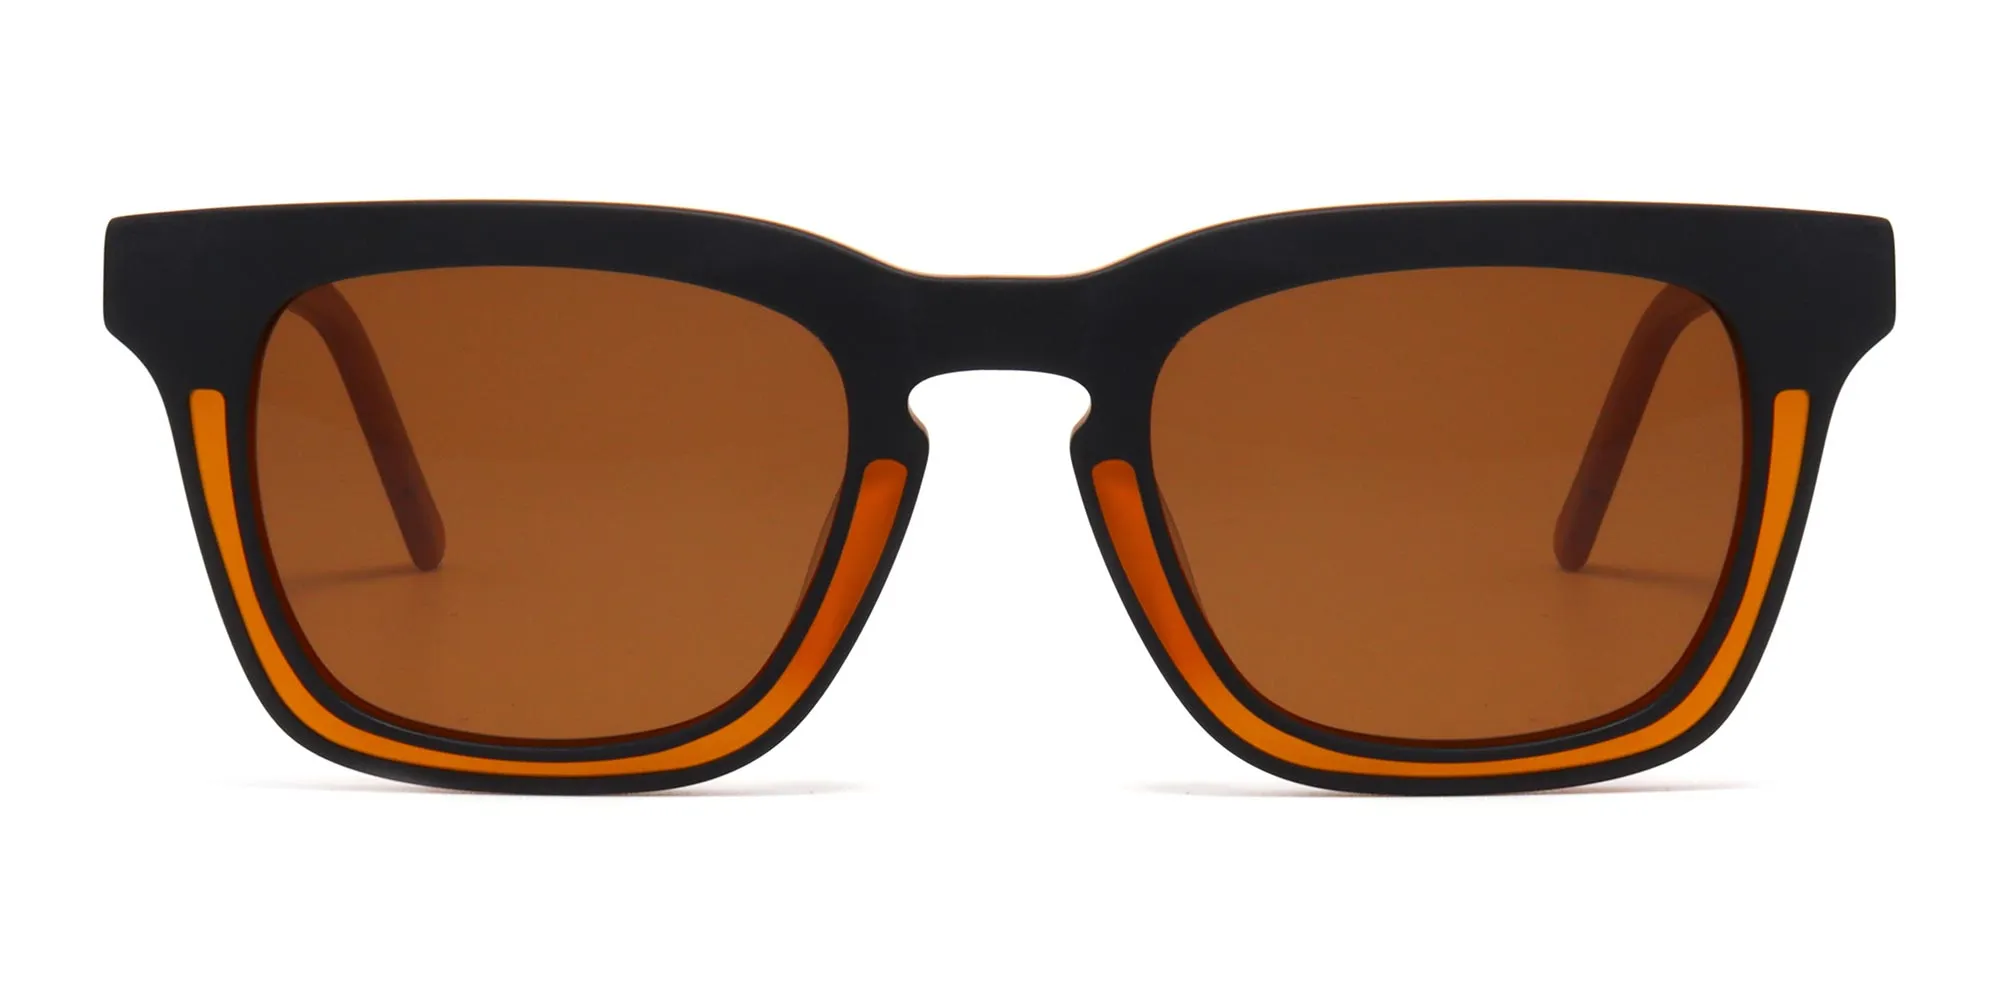 black and brown sunglasses